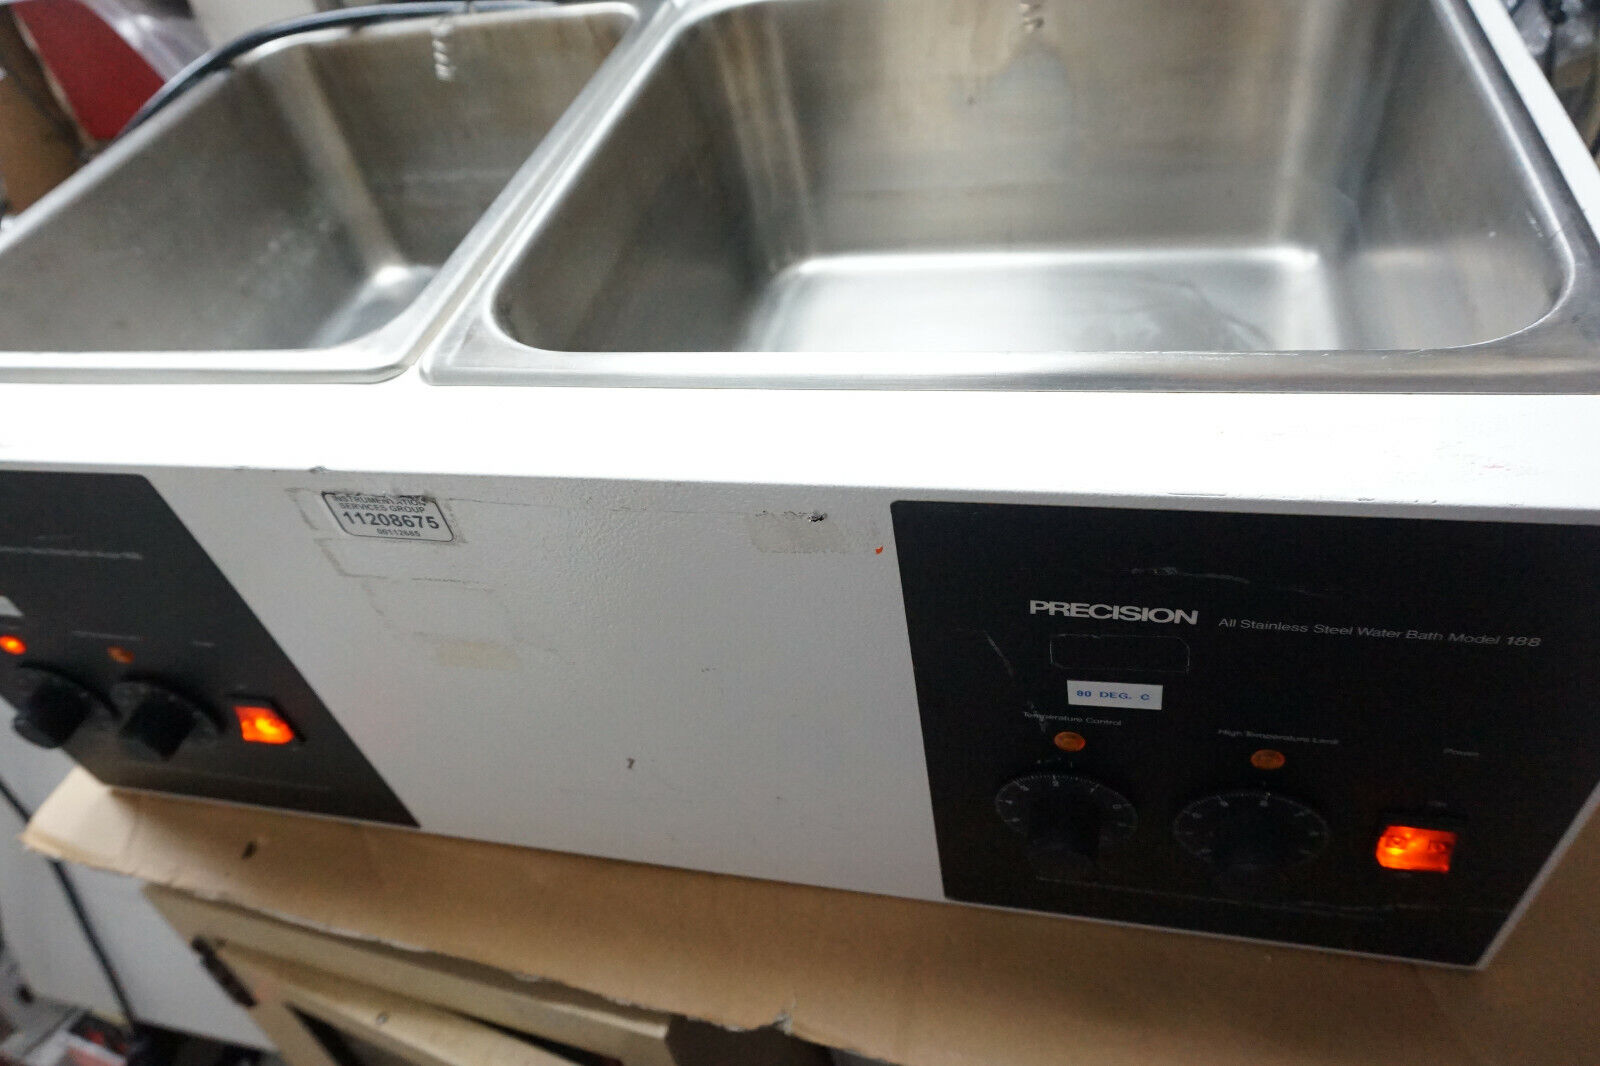  Precision 188  water bath waterbath variable temperature dual stainless 115